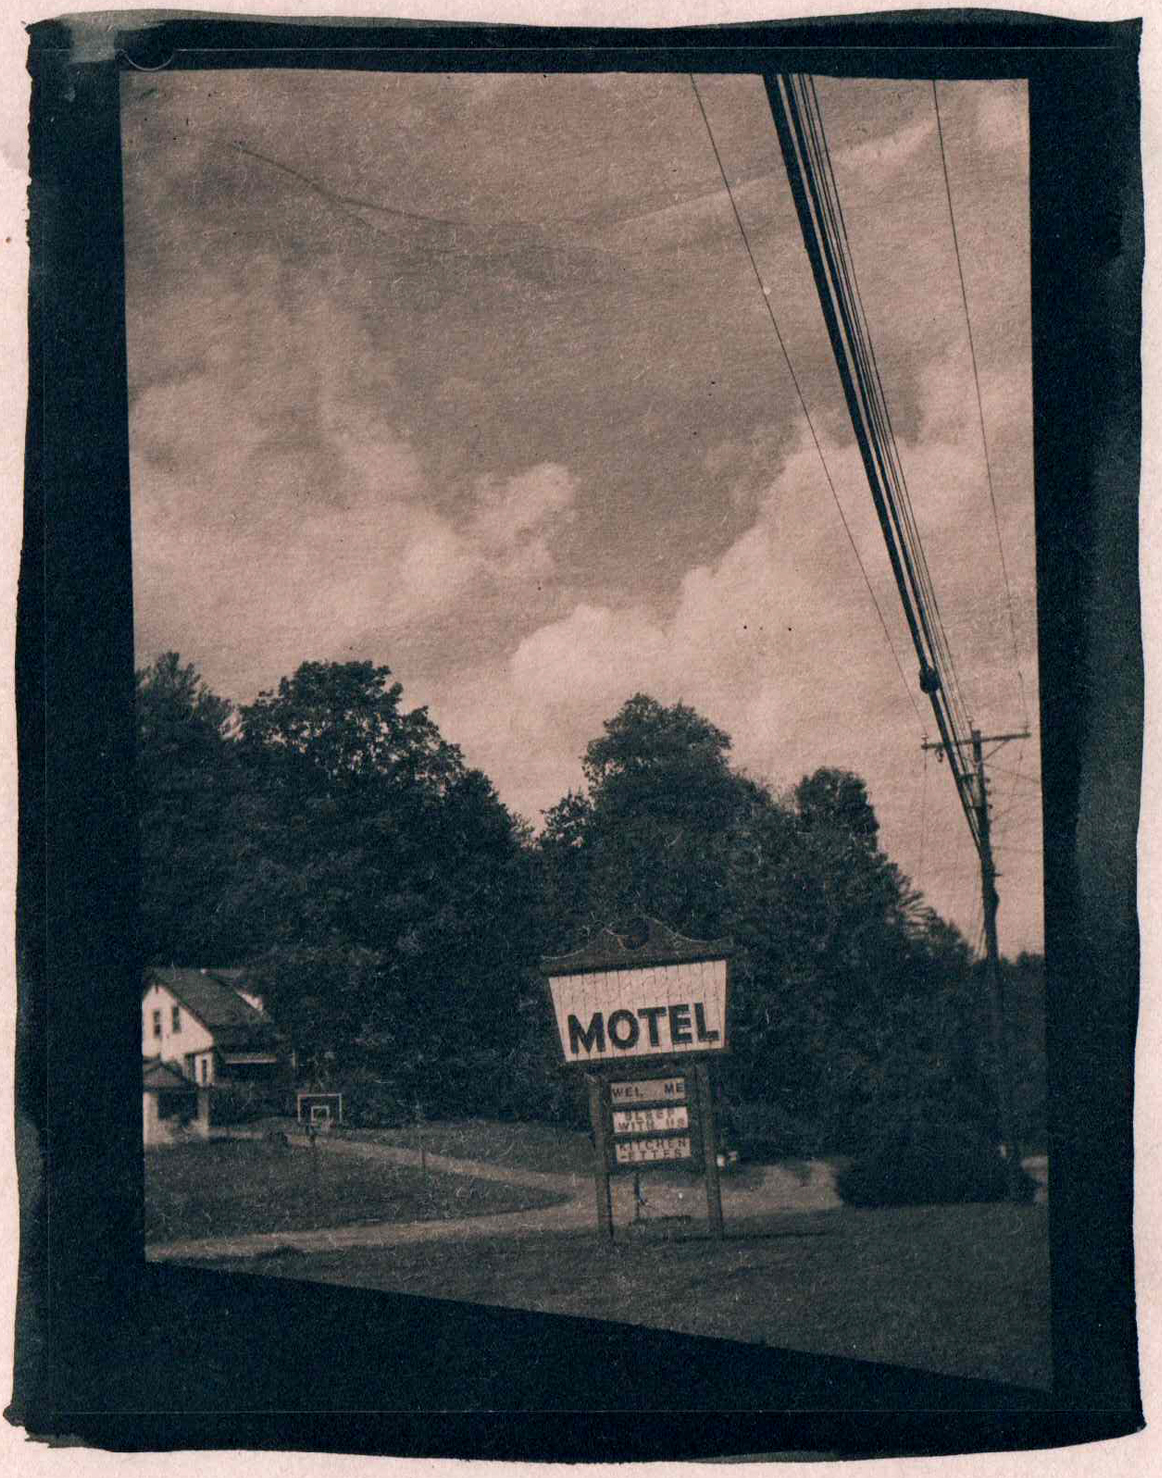 Sleep With Us | 4x5”, Tea toned cyanotype (from film negative shot in frankenstein 4x5 camera with magnifying glass lens), 2022